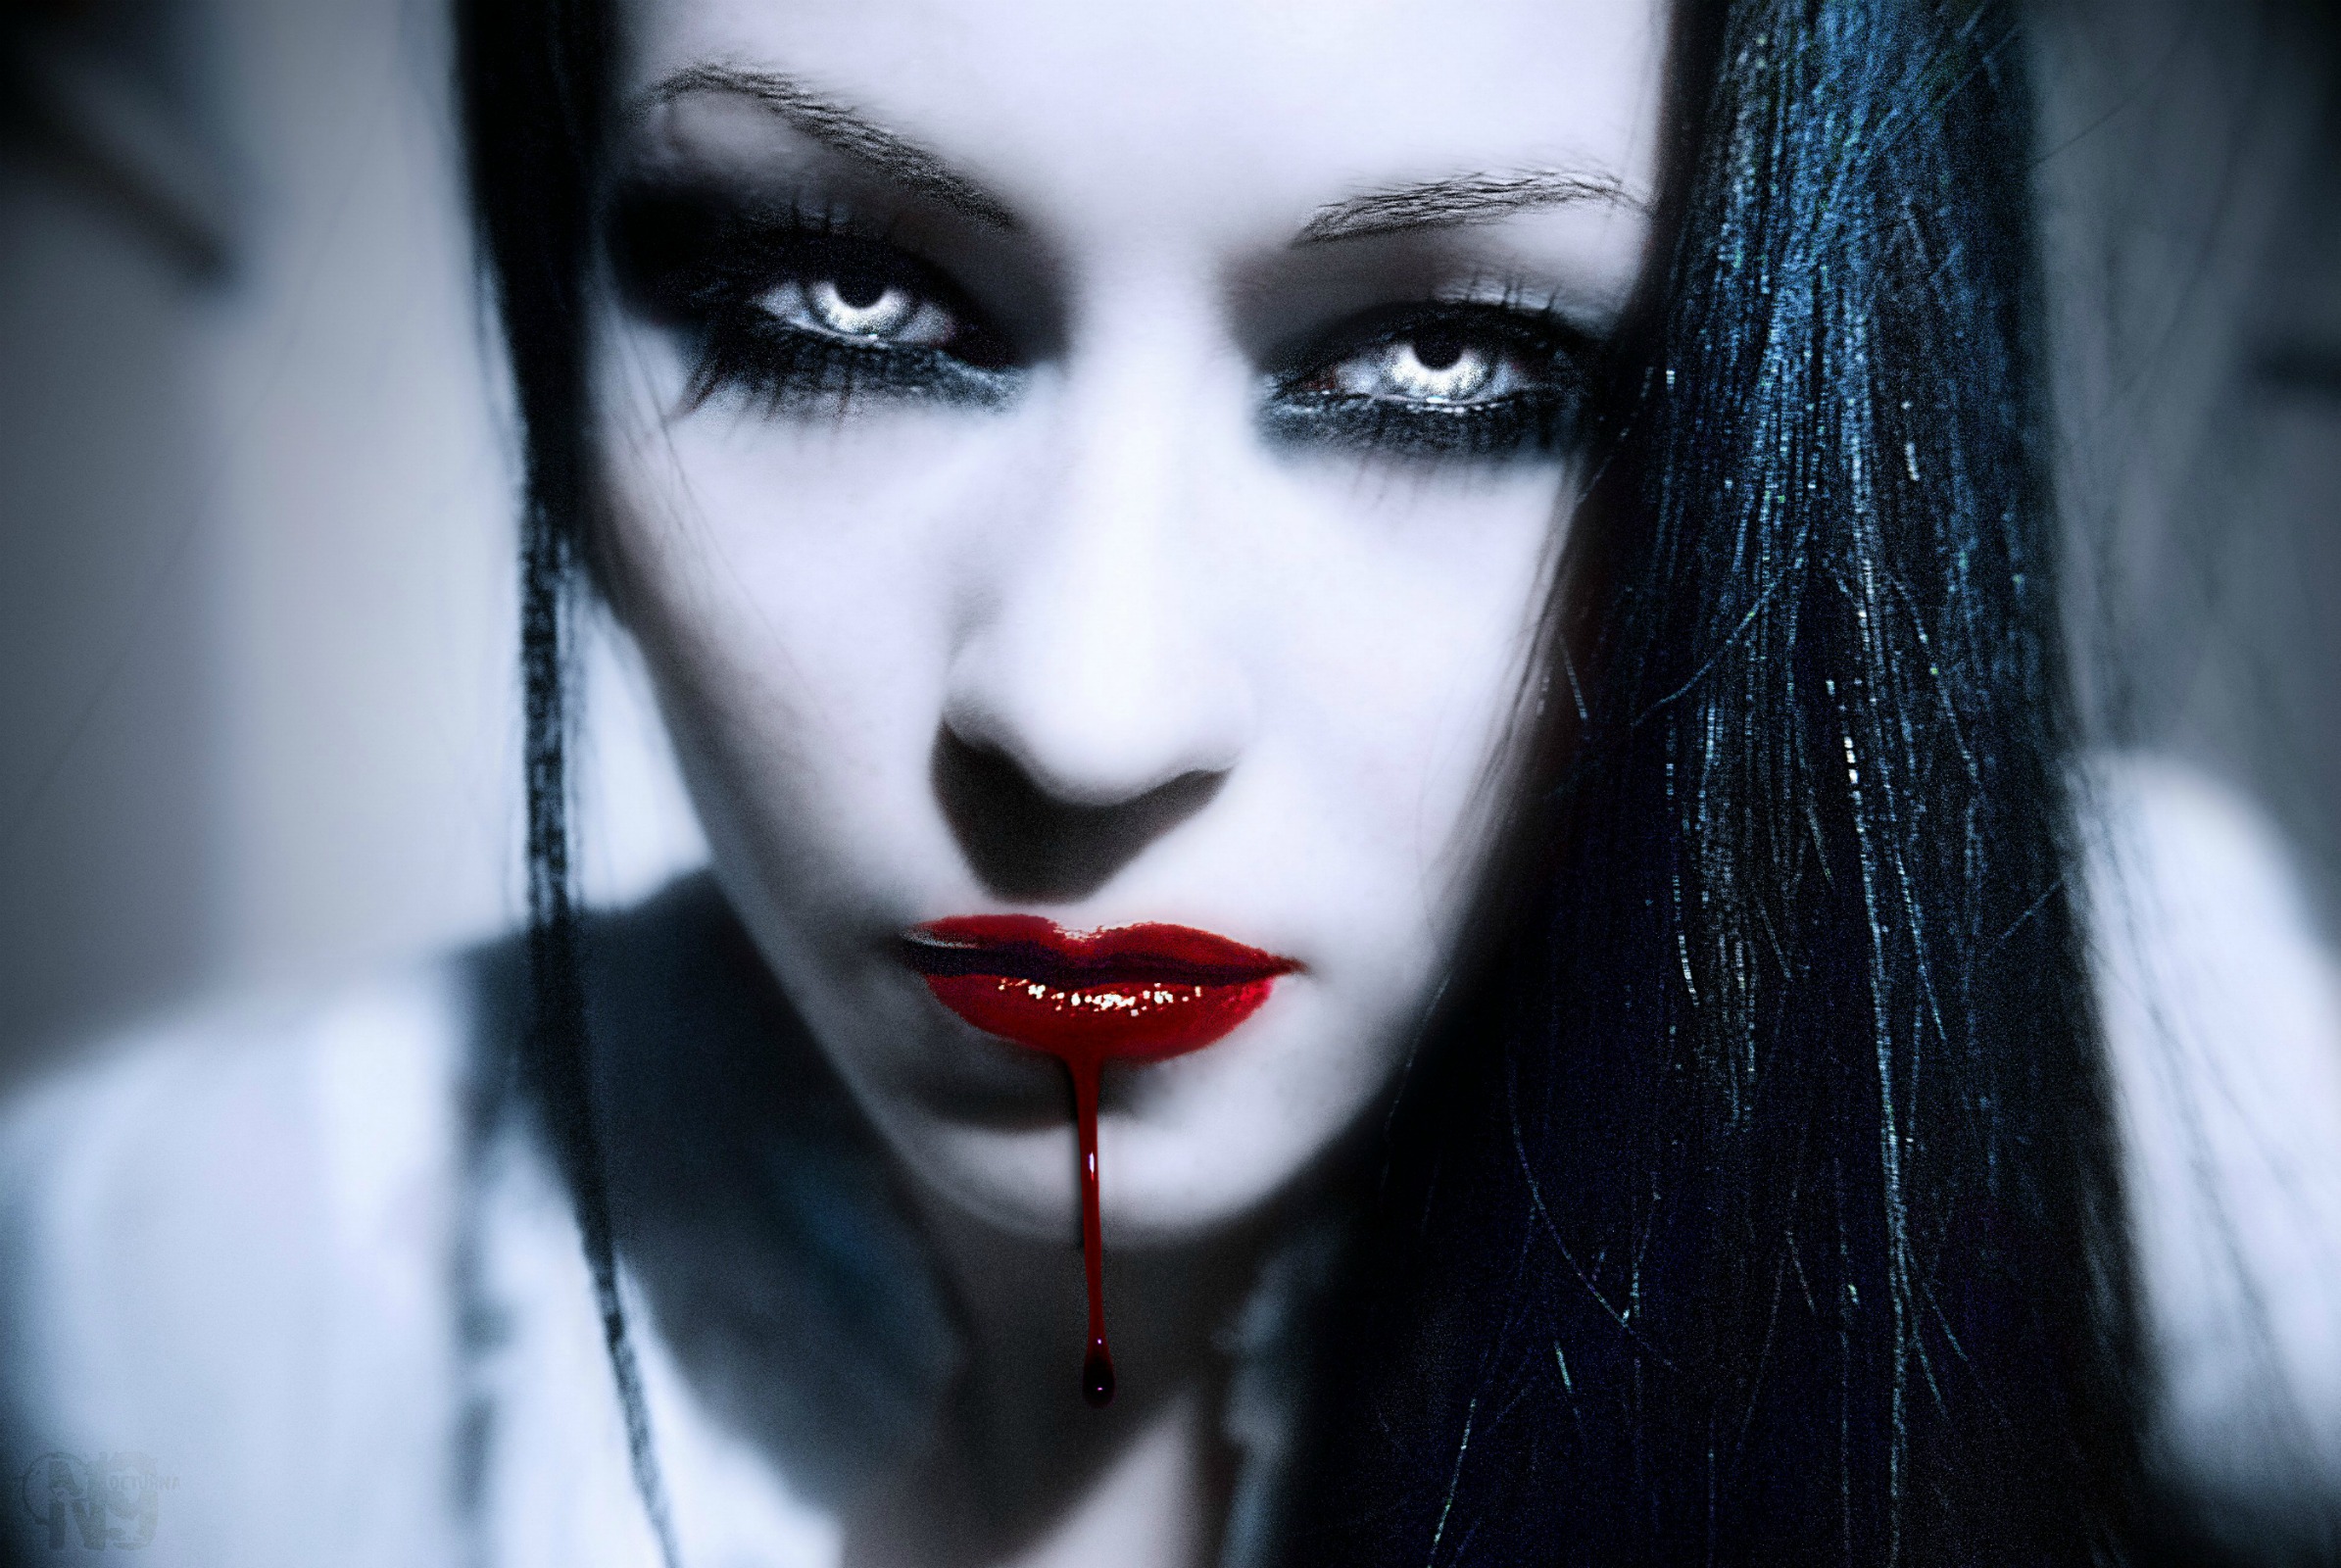 Drop Of Blood by KristianasCoven